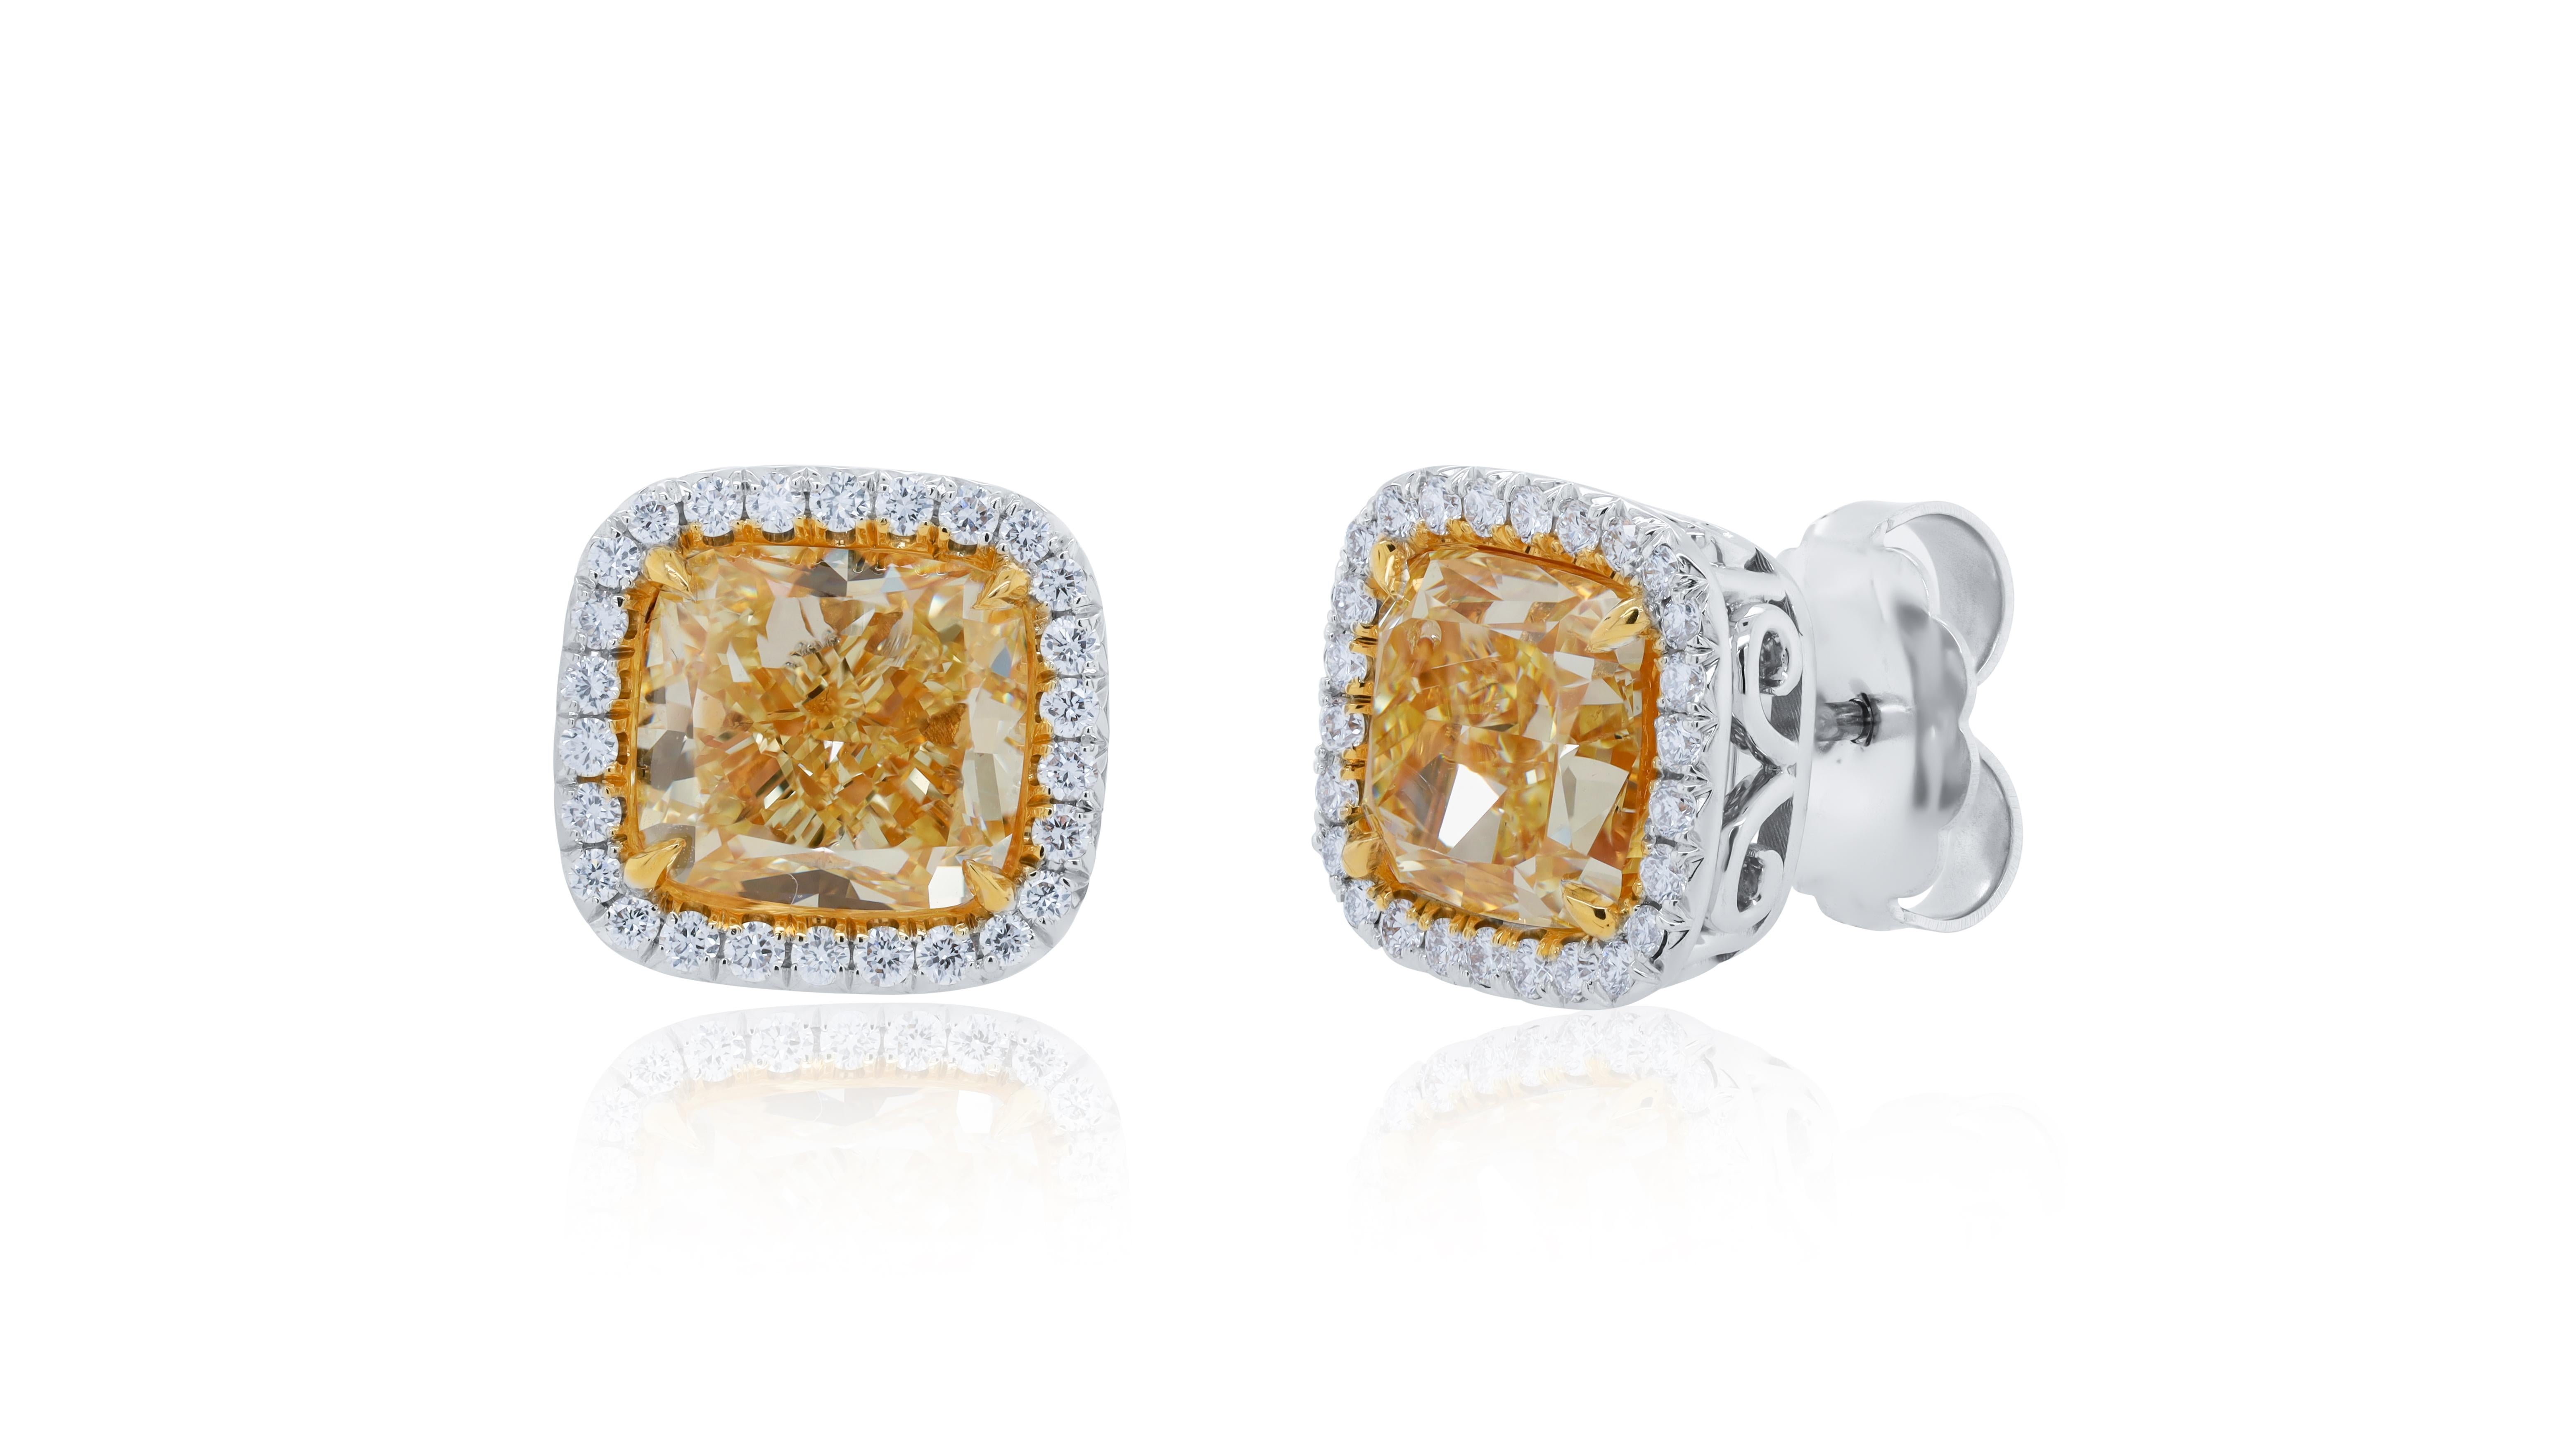 18KT Platinum Diamond studs, features 4.00 + 4.02ct  with 2 GIA certified cut diamonds fancy yellow VS1-VS2 in a diamond halo .60cts of diamonds on the sides.
Diana M. is a leading supplier of top-quality fine jewelry for over 35 years.
Diana M is